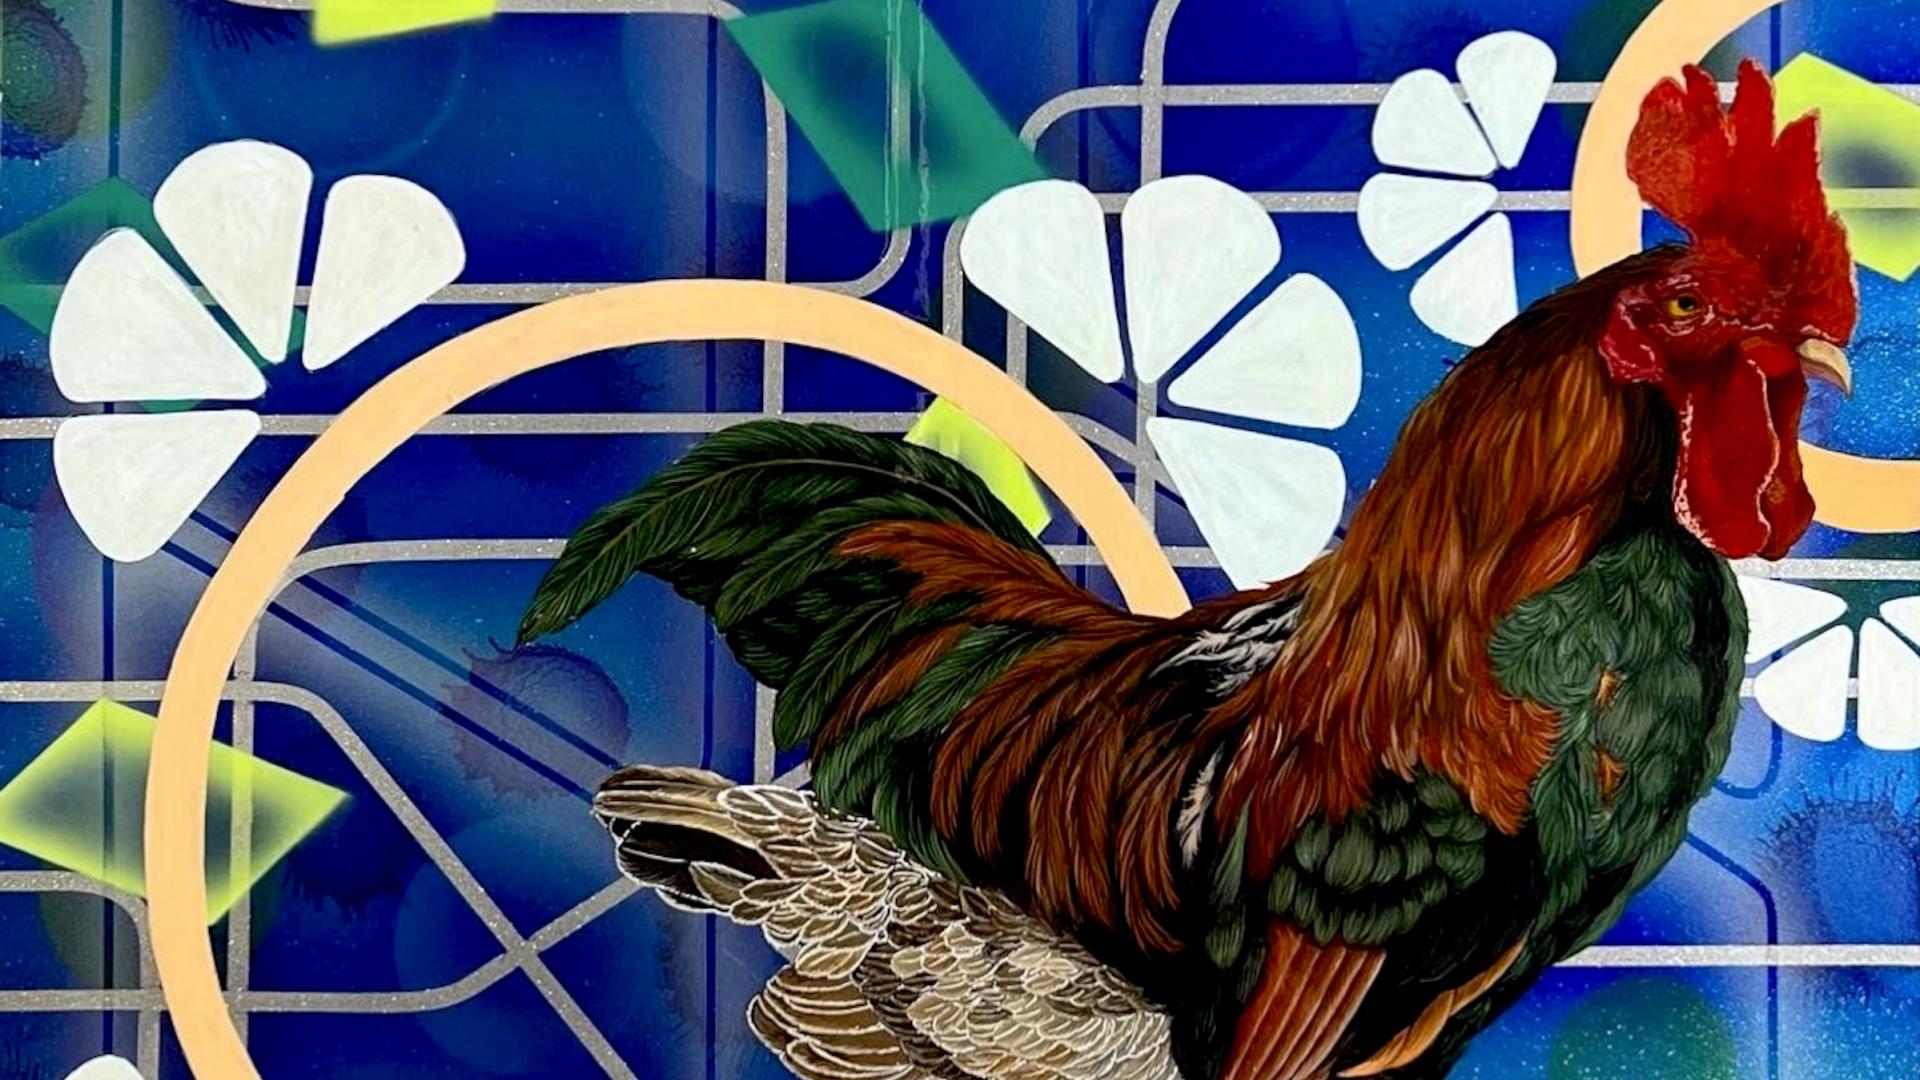 "When the Rooster Crows" by Jacqueline Valenzuela